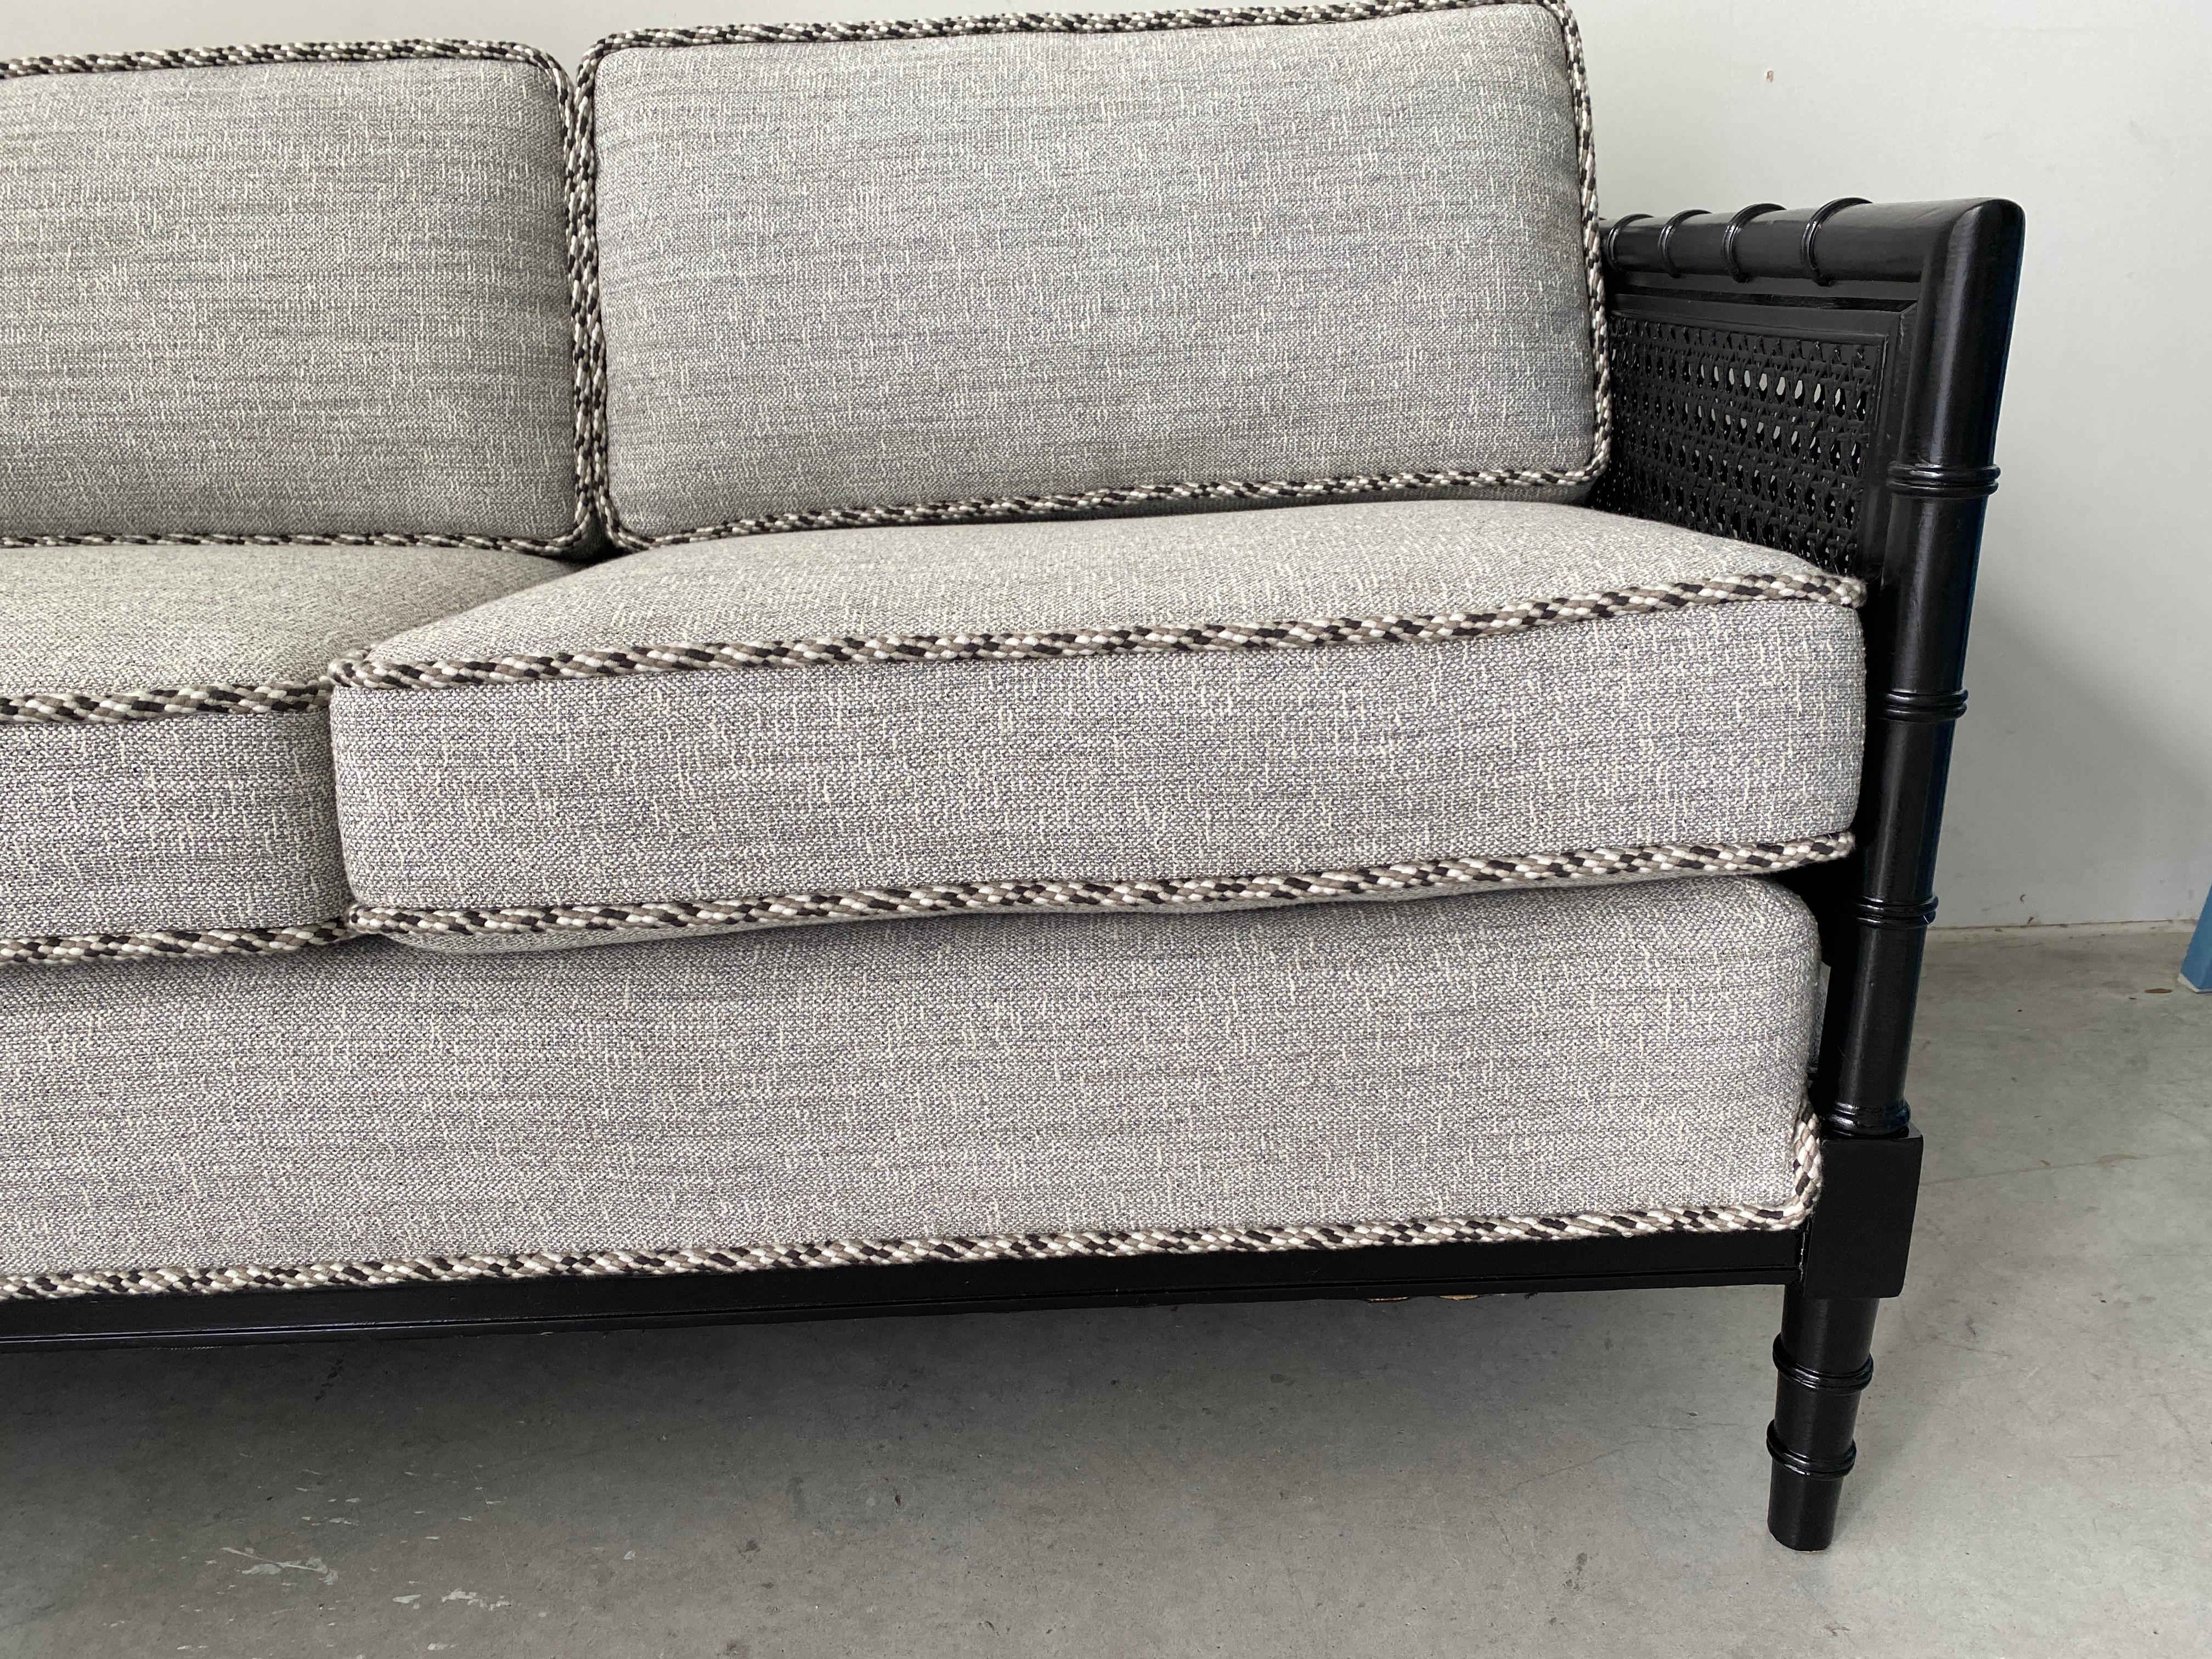 Black Faux Bamboo Settee in Scalamandré Black, White, & Gray Tweed Fabric, 1970s For Sale 8